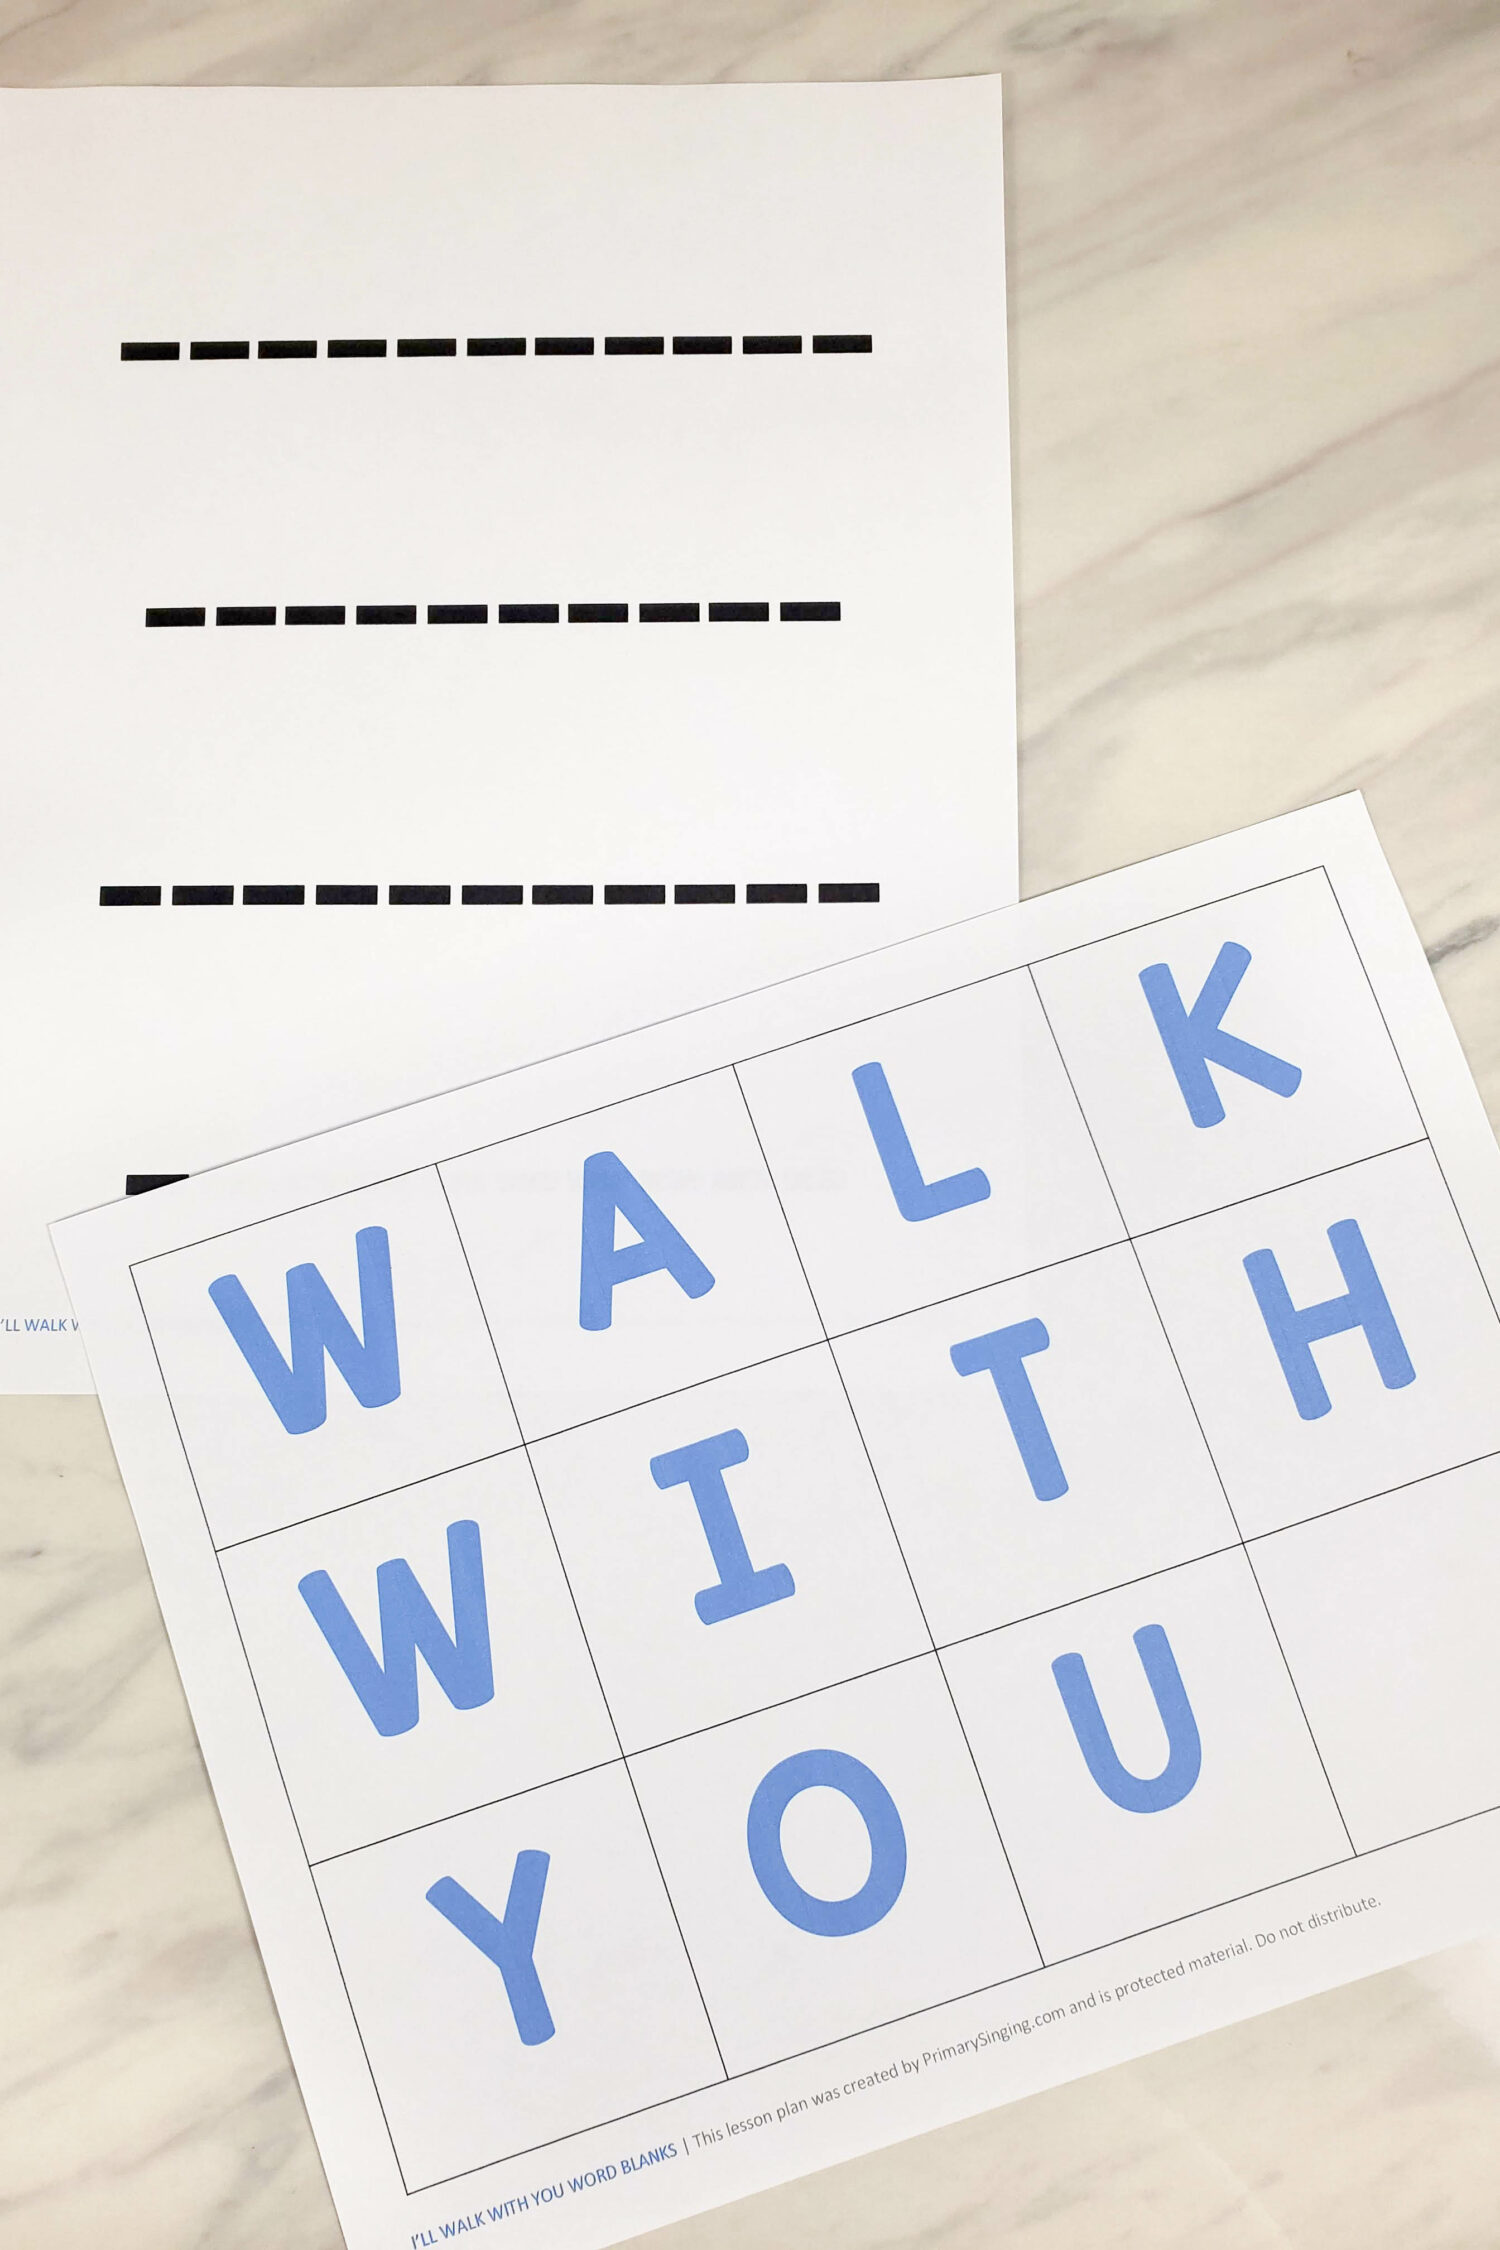 I'll Walk with You Word Blanks singing time ideas! Use these long blanks in a row and have the kids guess letters until they can figure out the phrase! It's a fun twist on hangman that will add in lots of song repetition and fun! See the lesson plan for LDS Primary music leaders and families.